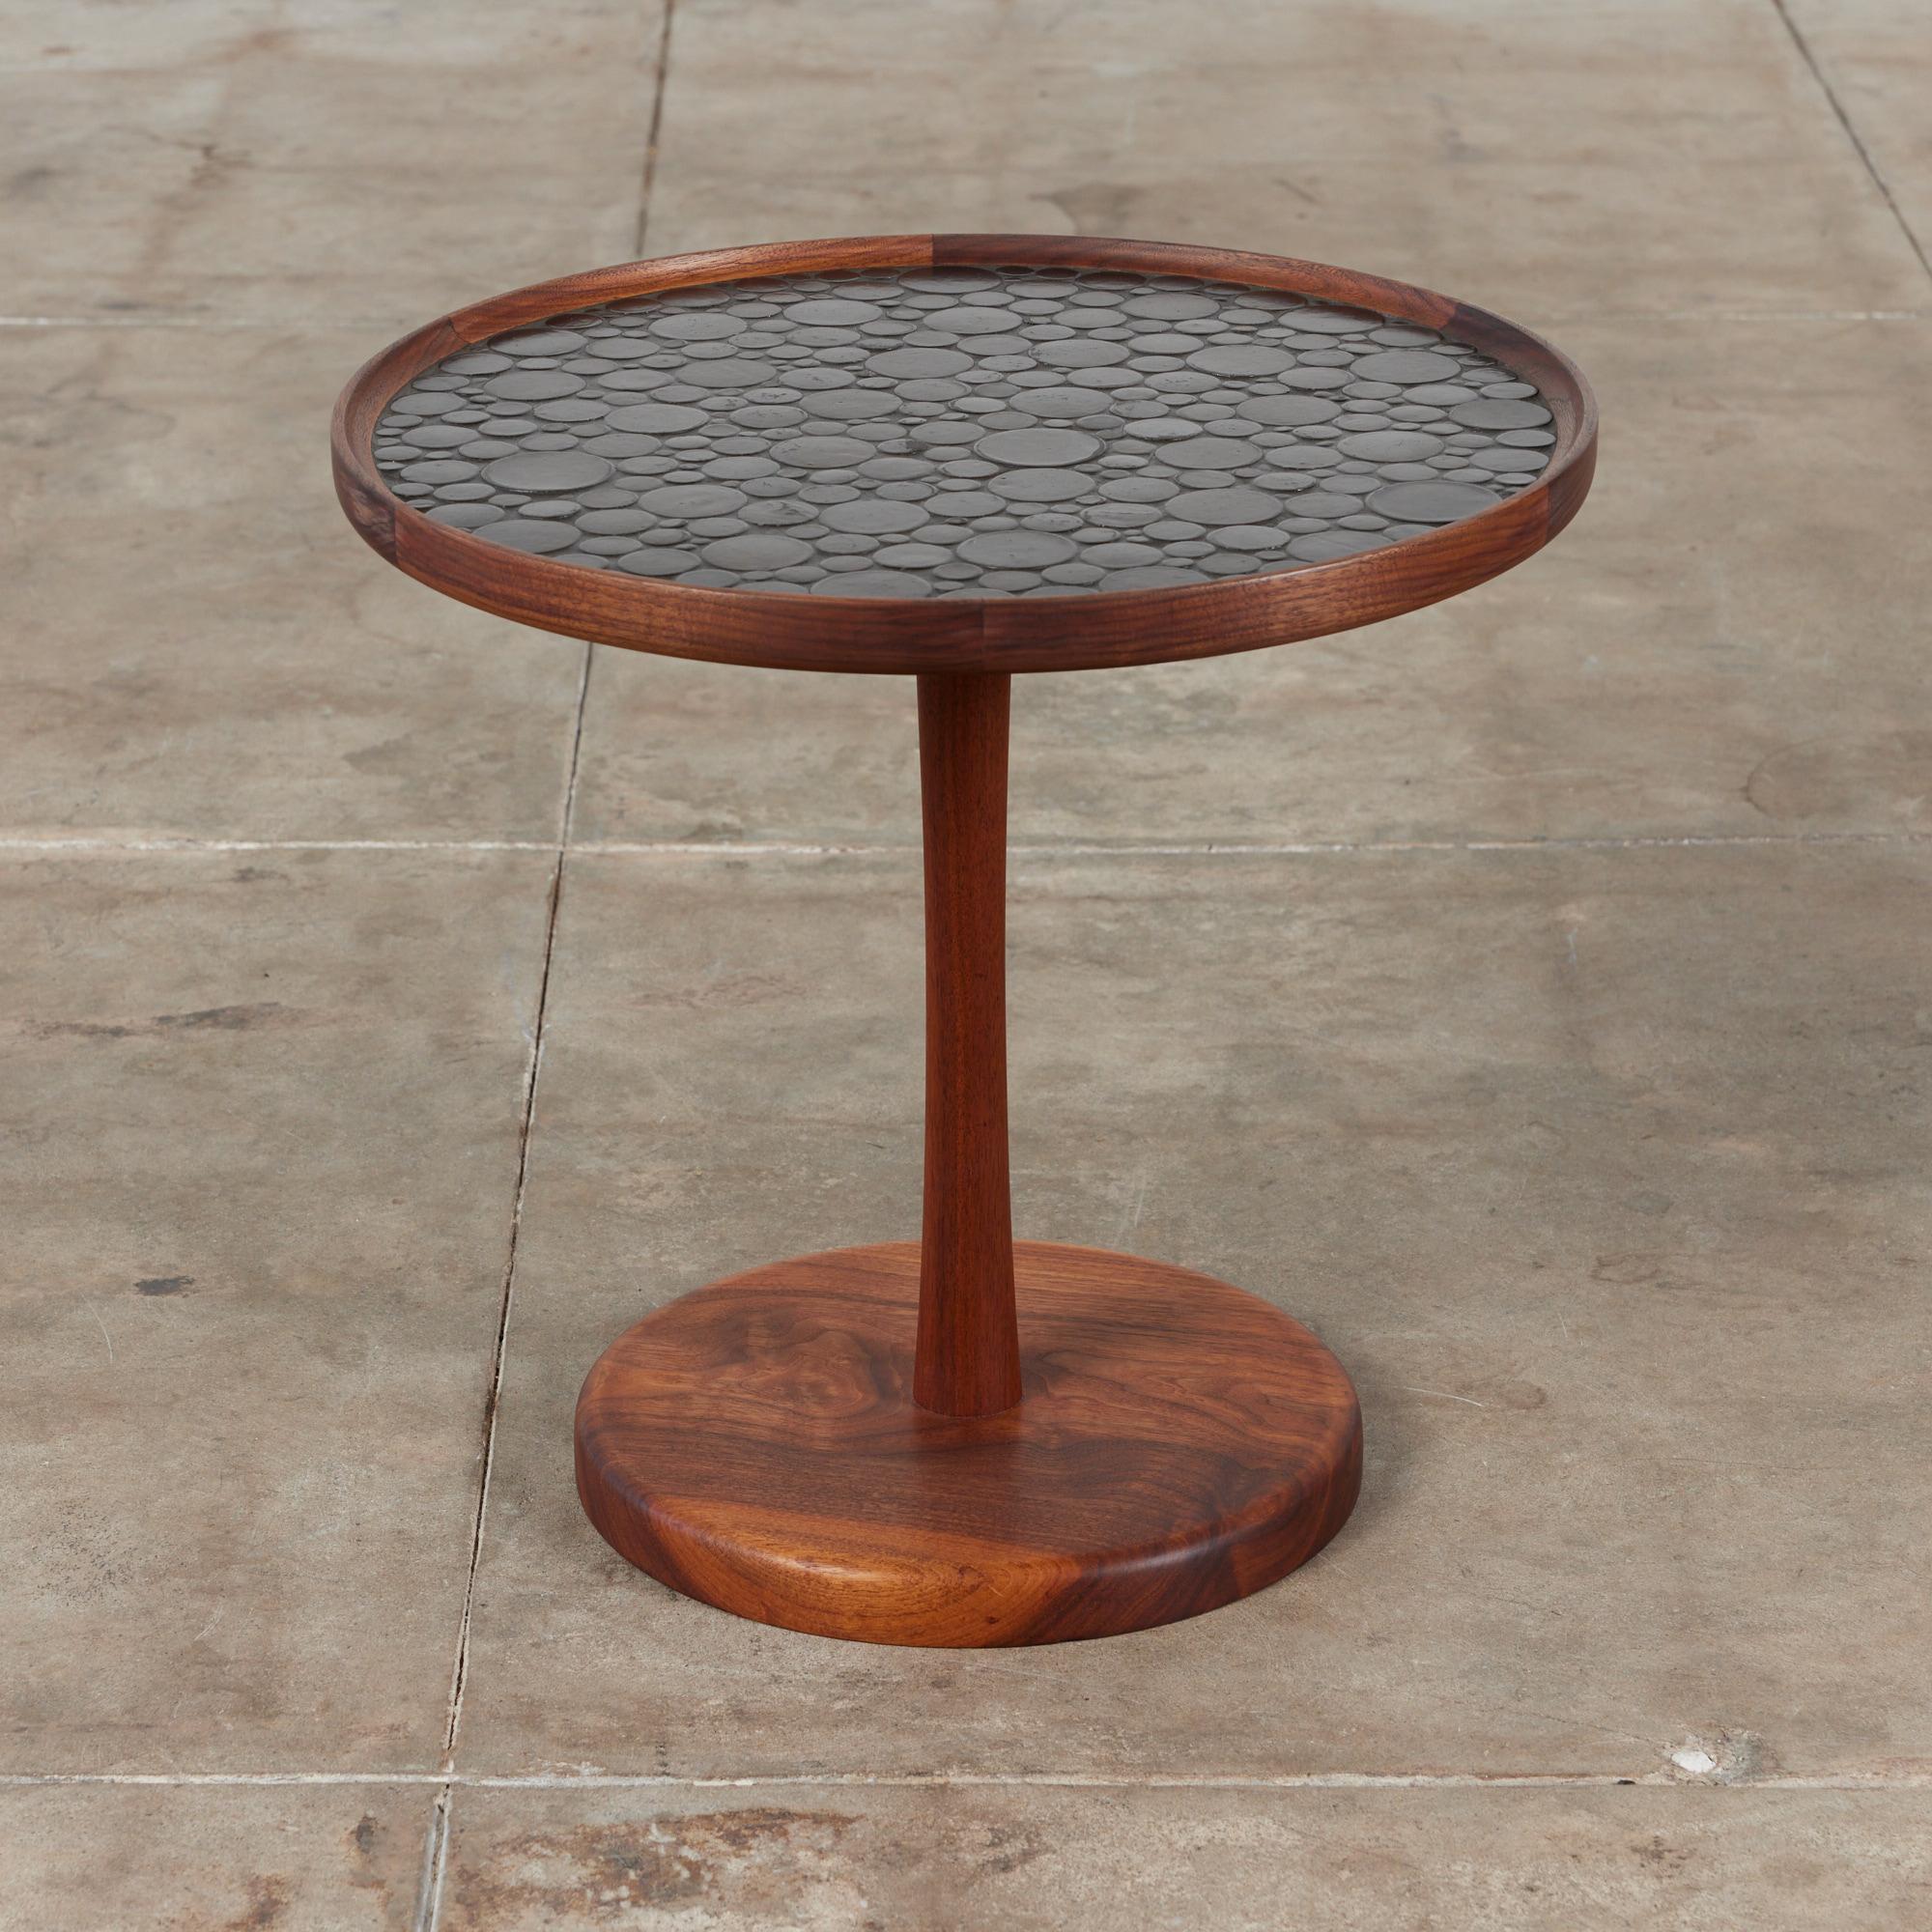 Round side table by Gordon & Jane Martz. The table top is inlaid with black ceramic coin tiles. The frame, base and pedestal of the table are all solid walnut.

Dimensions
20